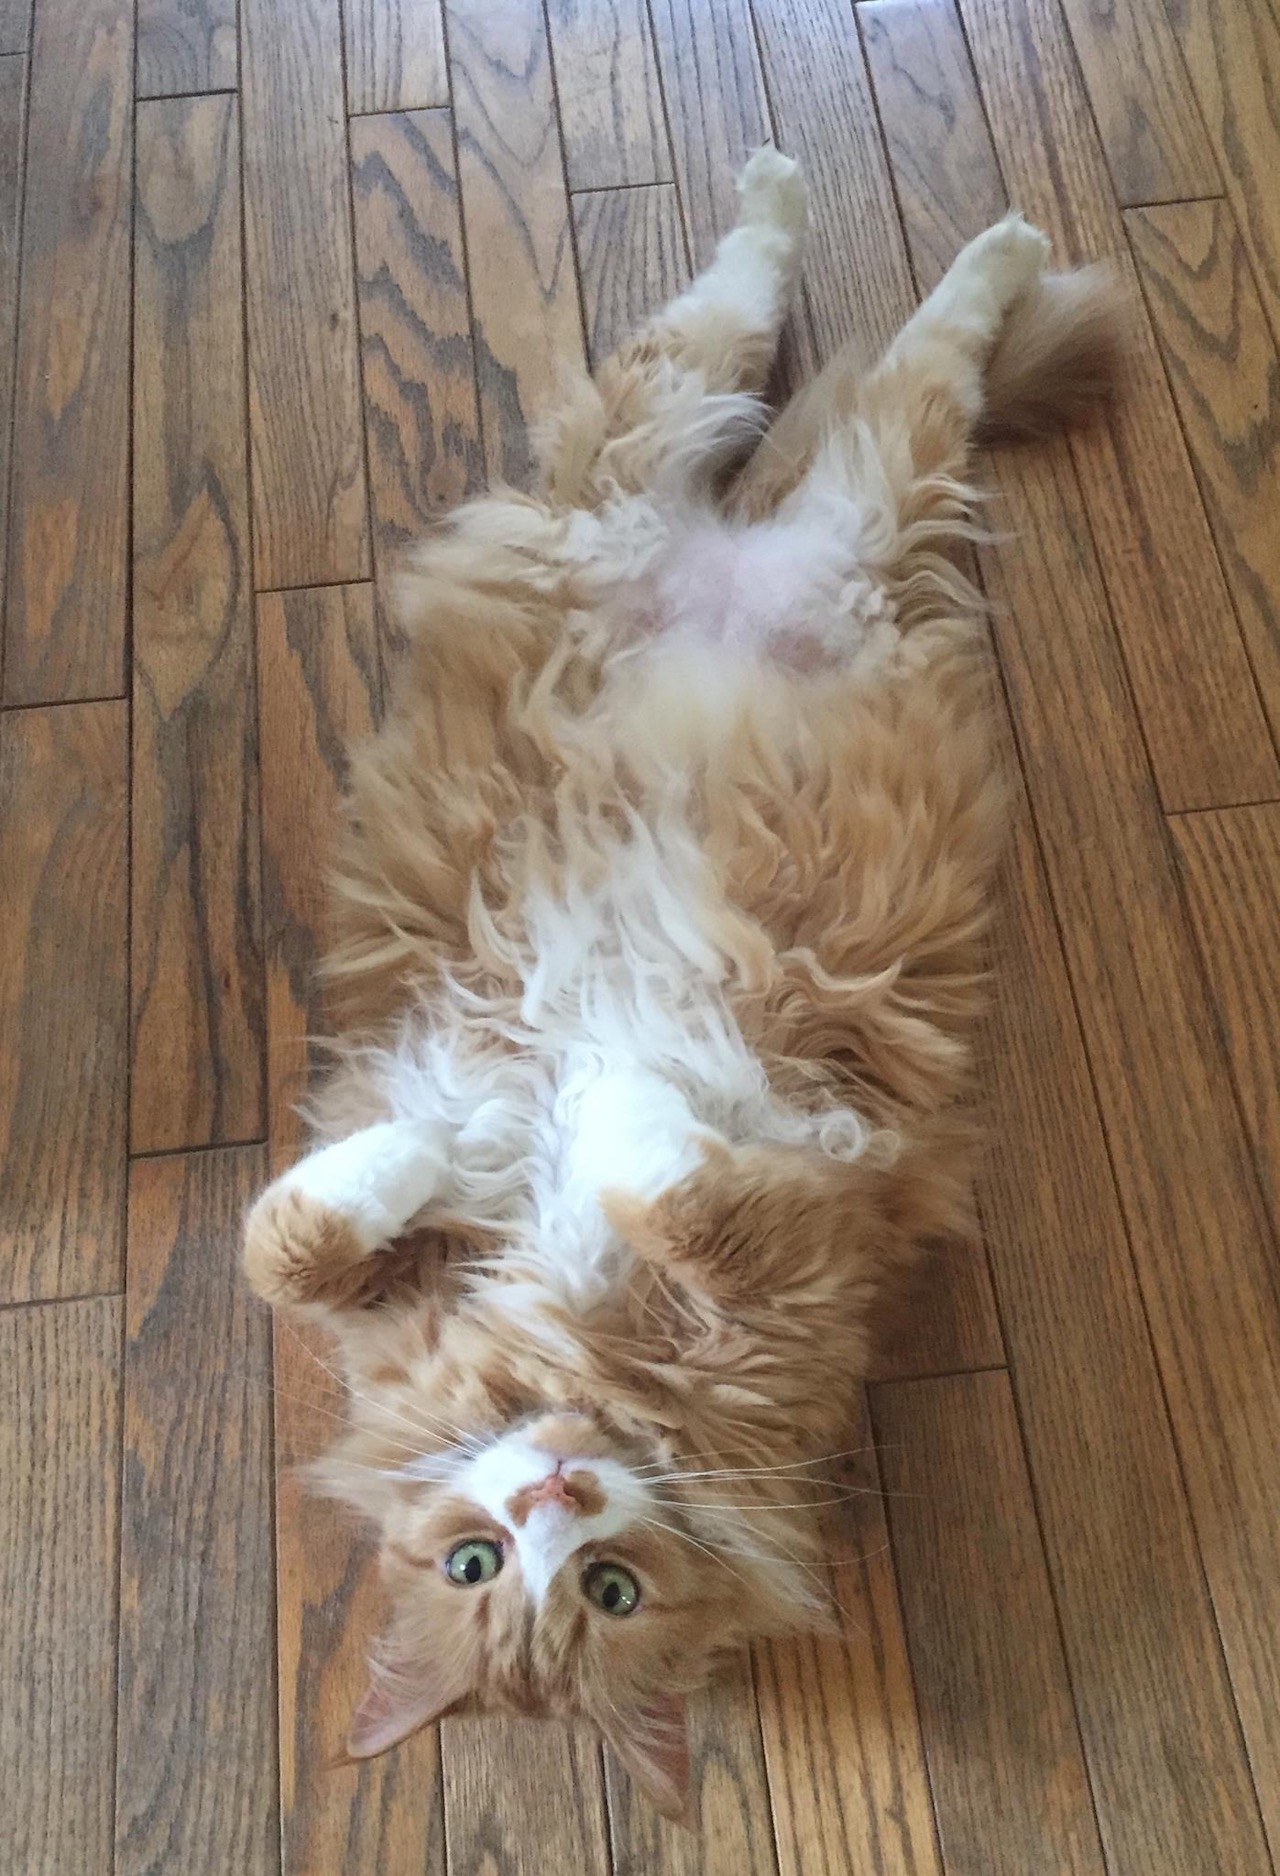 An orange and white longhaired cat stretched out on its back on a wood floor